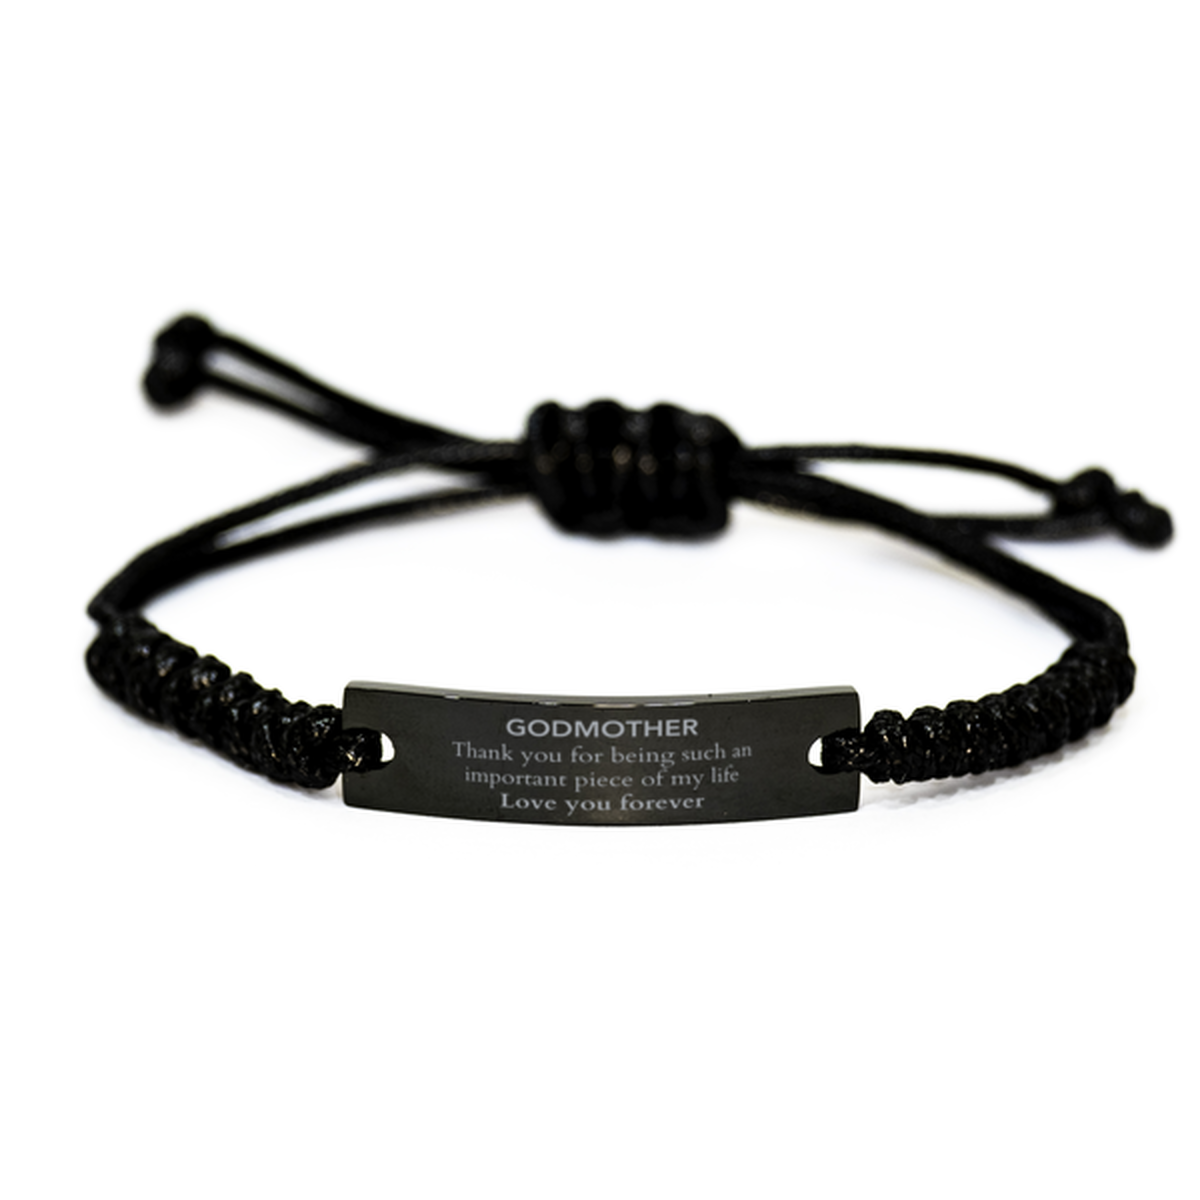 Appropriate Godmother Black Rope Bracelet Epic Birthday Gifts for Godmother Thank you for being such an important piece of my life Godmother Christmas Mothers Fathers Day